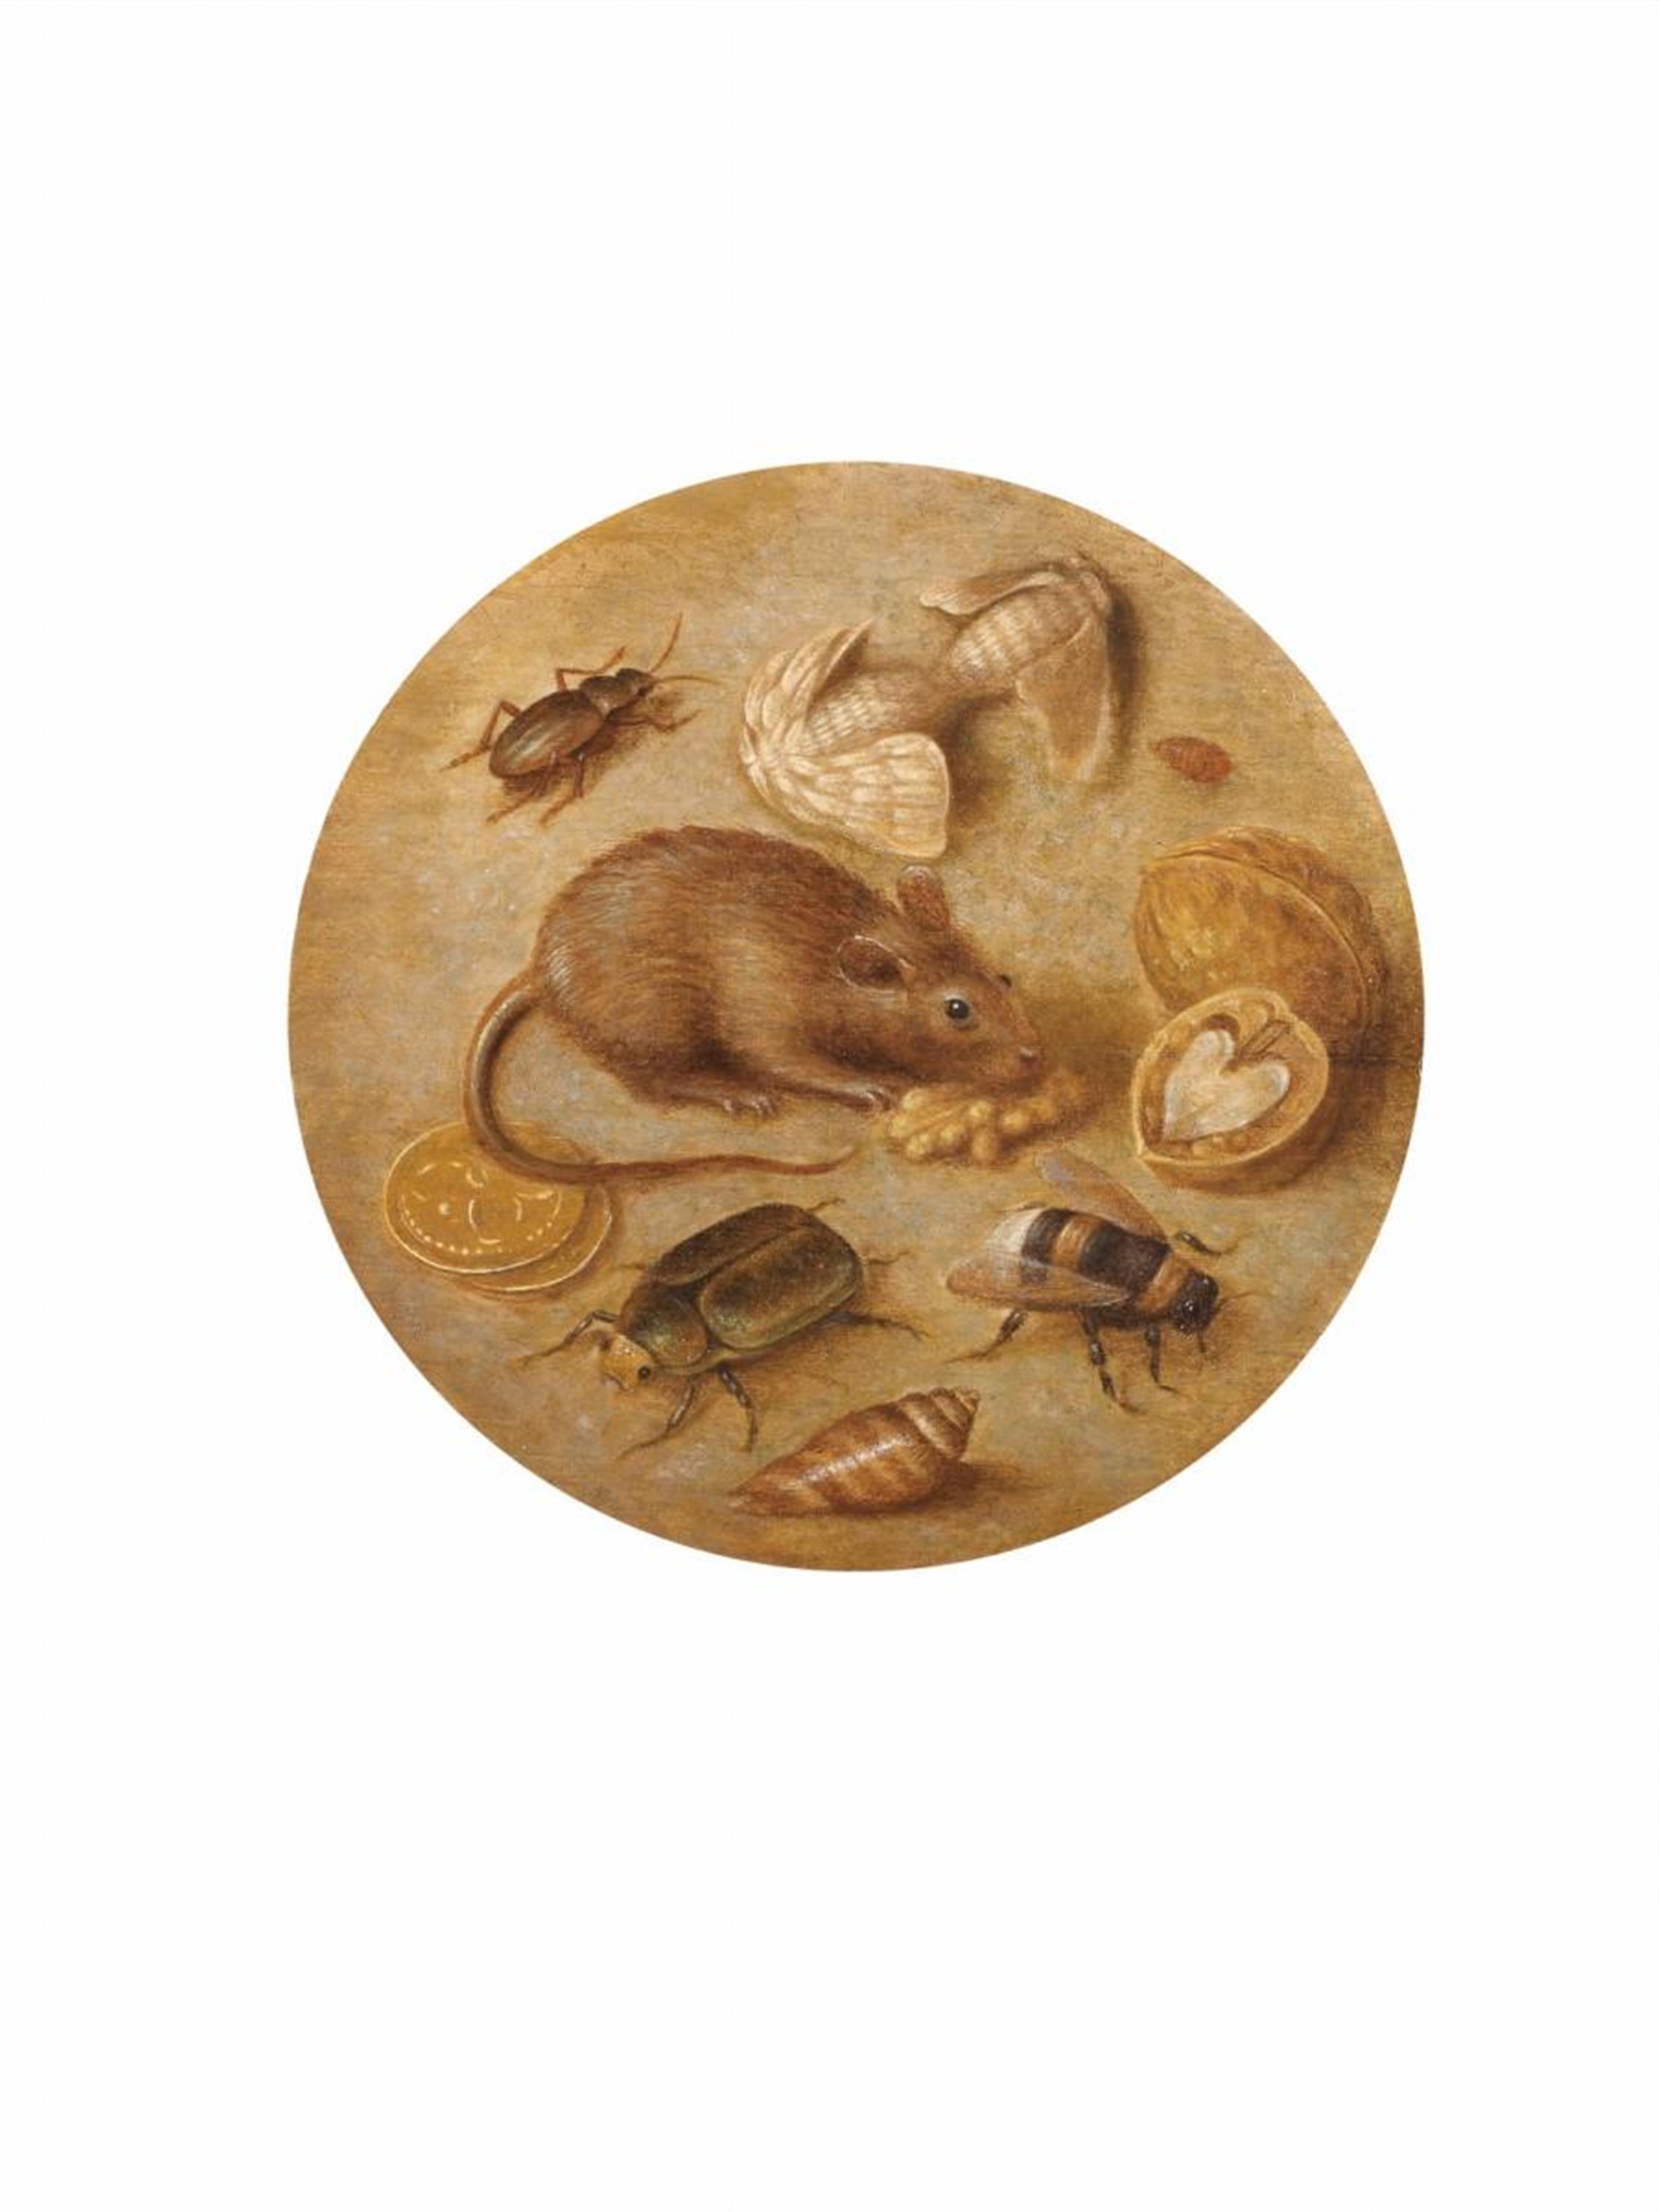 Georg Flegel, follower of - STILL LIFE WITH MICE, INSECTS, COINS, AND WALNUTS - image-1